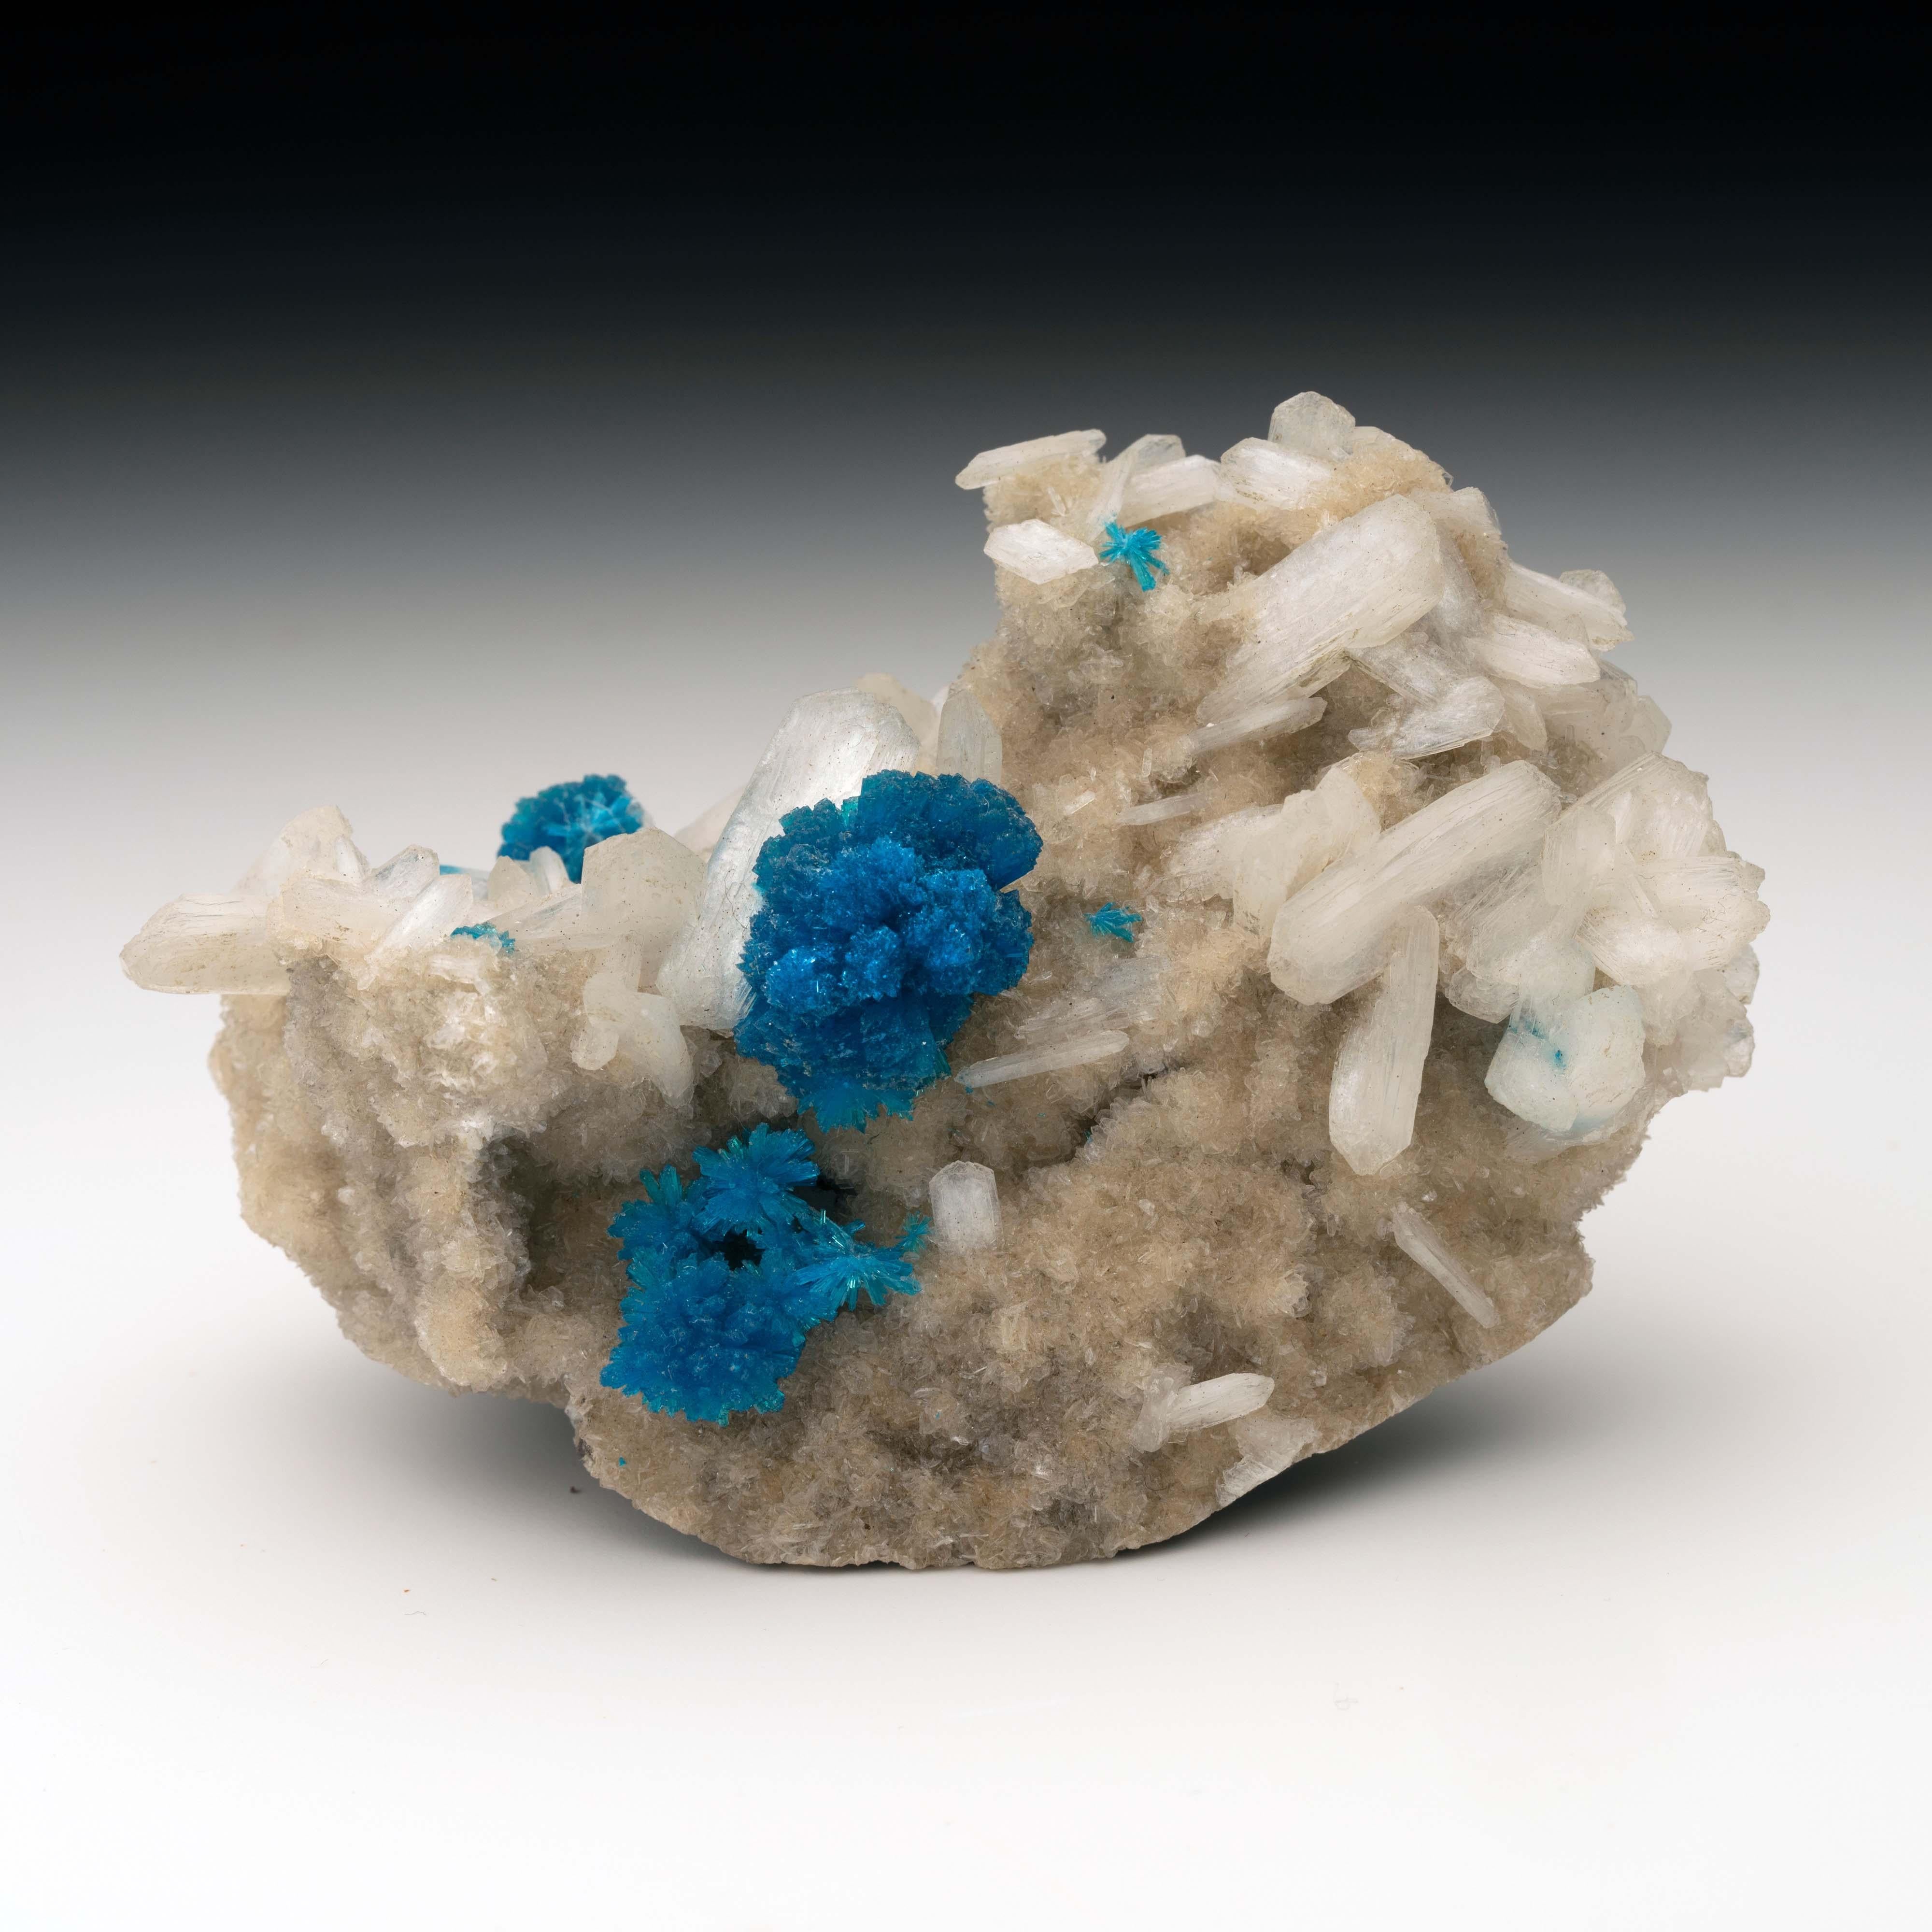 This uniquely shaped specimen features stunning blue cavansite highlighted against the backdrop of an off-white matrix accented by a scattering of white, waxy stilbite crystals. A unique piece to add color and texture to any fine minerals